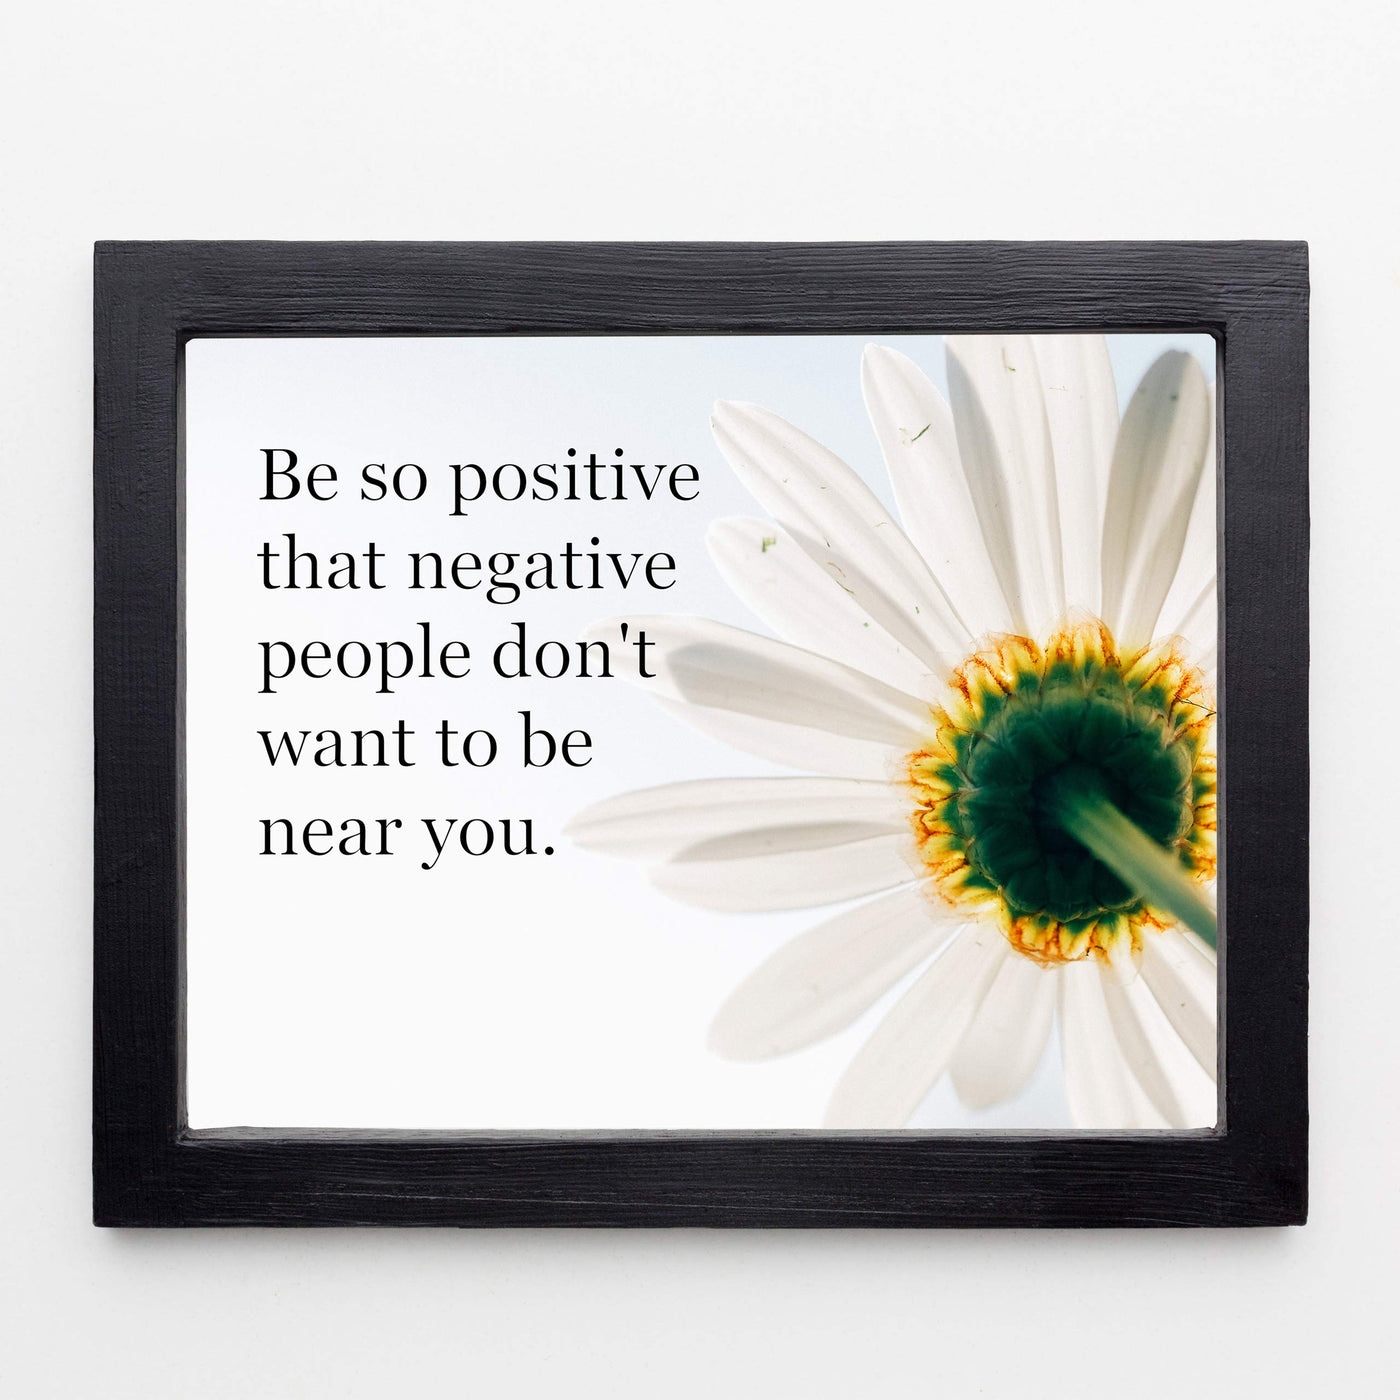 Be So Positive-Negative People Don't Want To Be Near You Inspirational Quotes Wall Art -10 x 8" Floral Poster Print-Ready to Frame. Modern Typographic Design. Home-Office-Church-Christian Decor.